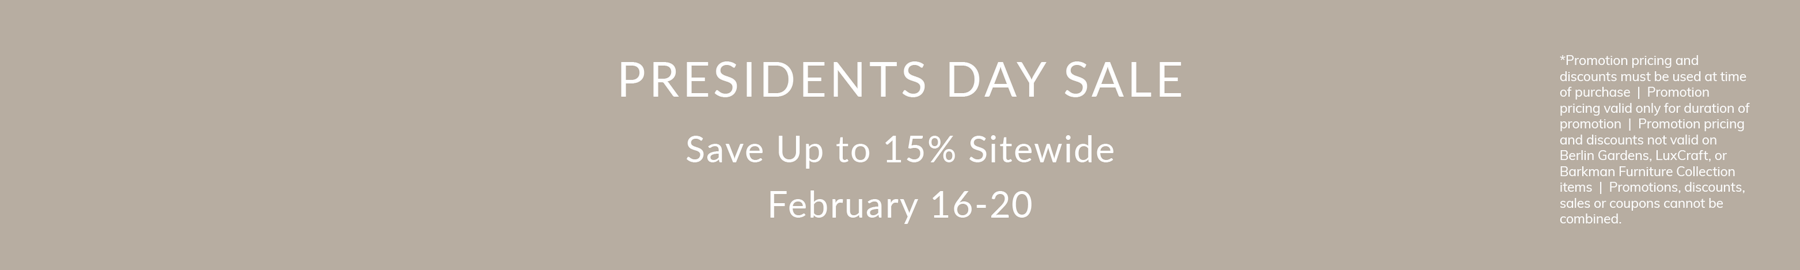 Presidents Day Sitewide Sale